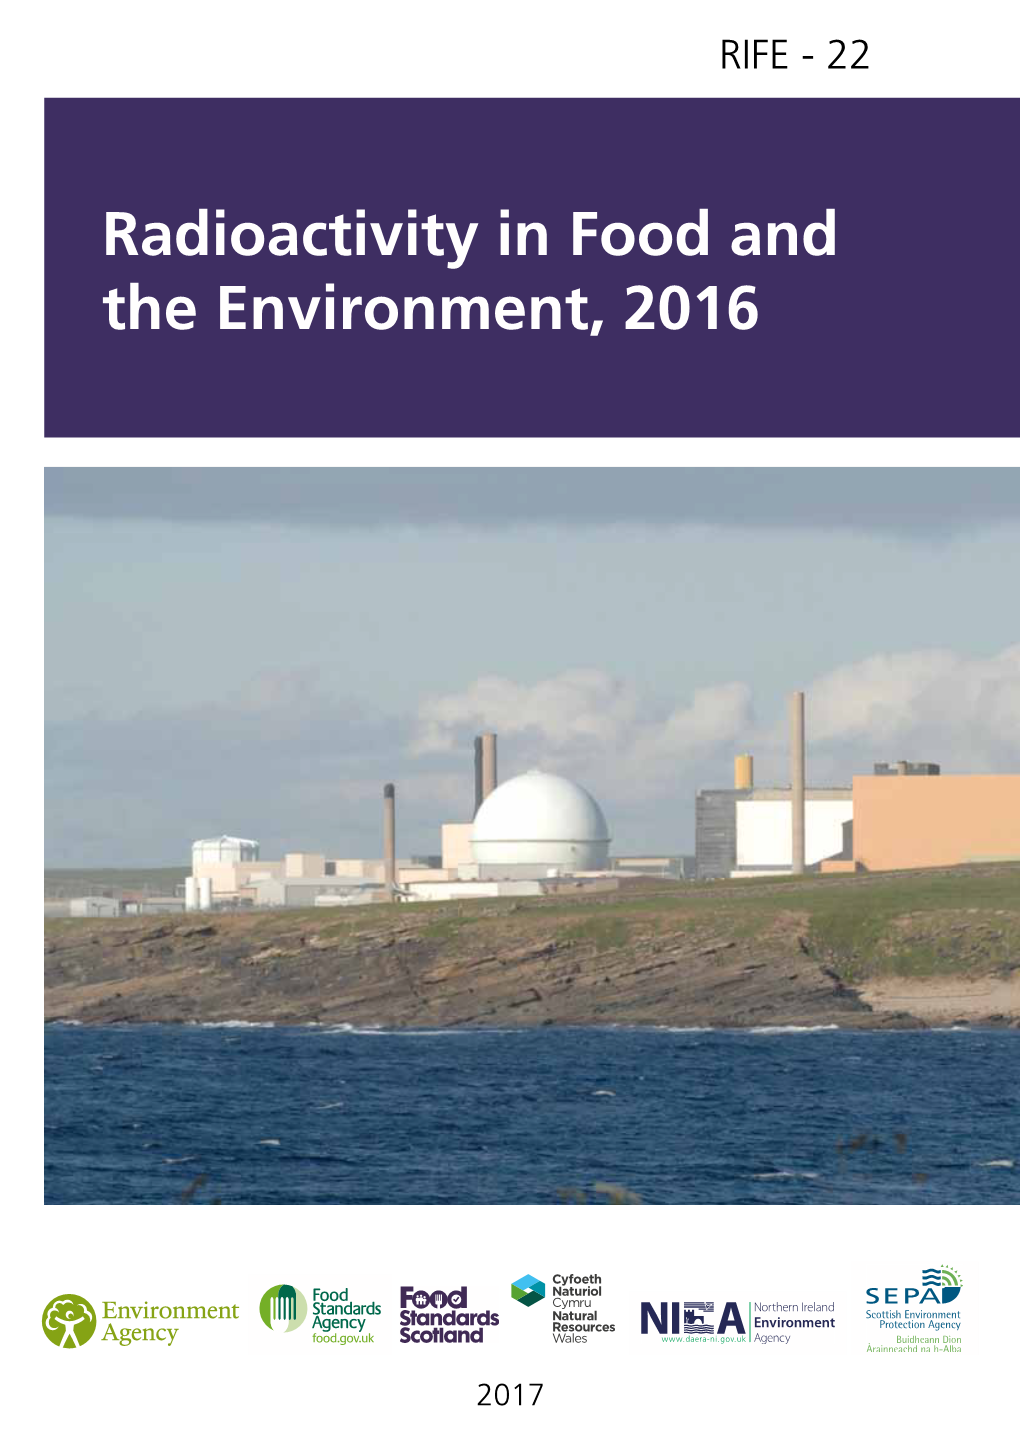 View Radioactivity in Food and the Environment (RIFE) Report 2016